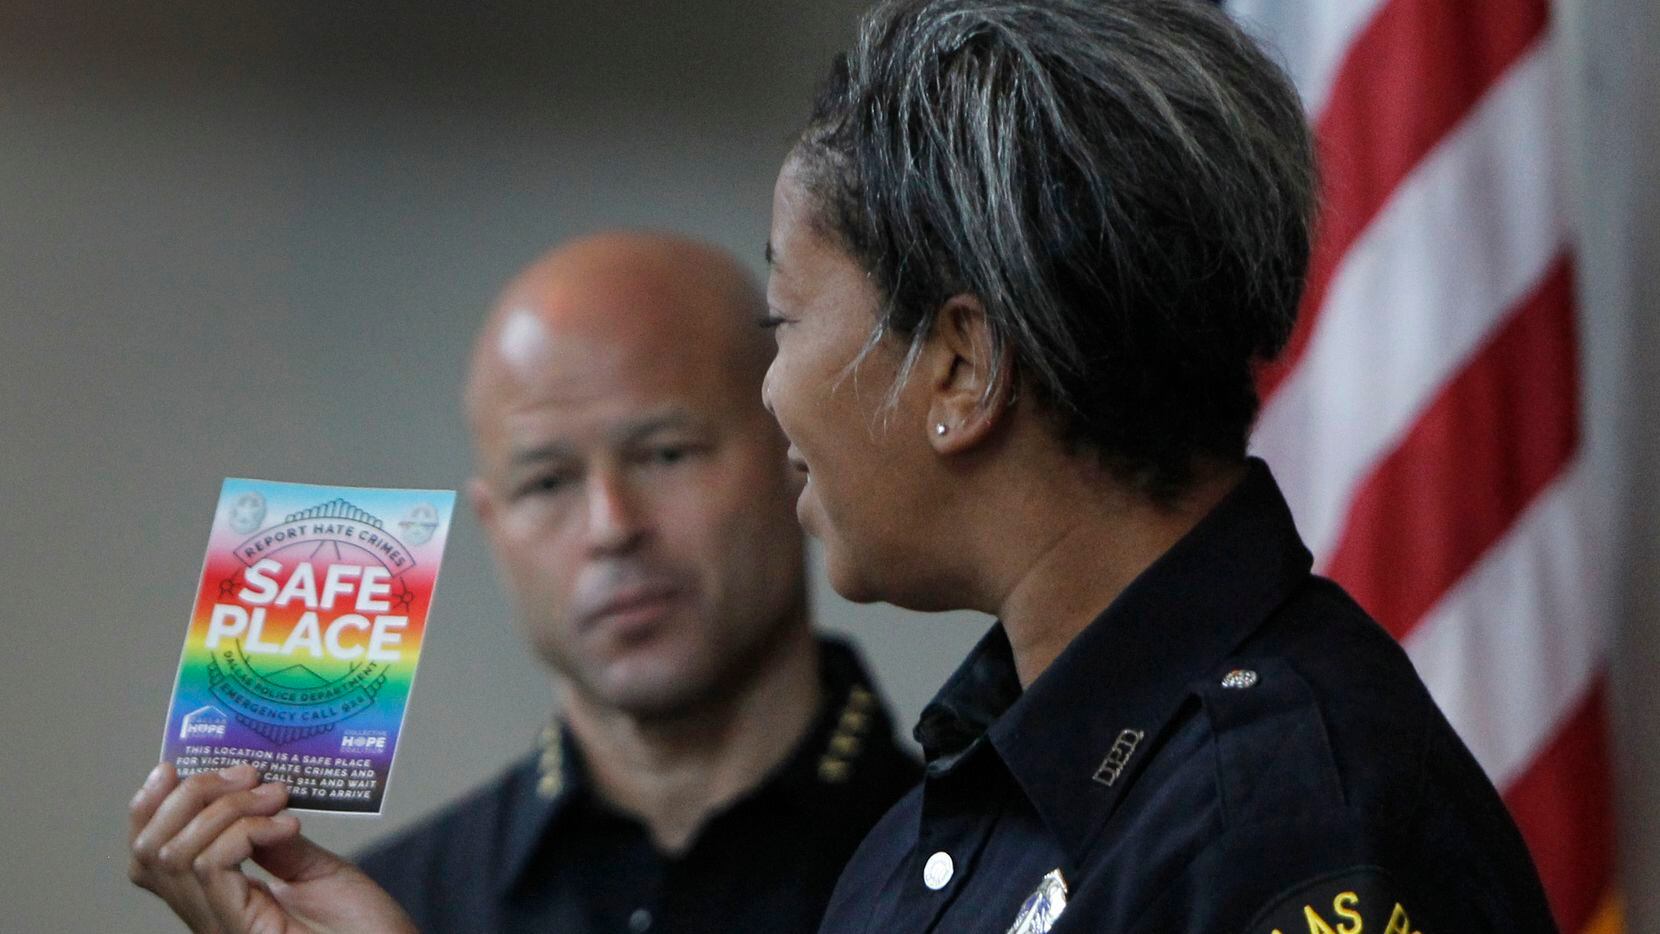 Dallas Police Department's new LGBTQ+ liaison, officer Megan Thomas displays the Safe Place...